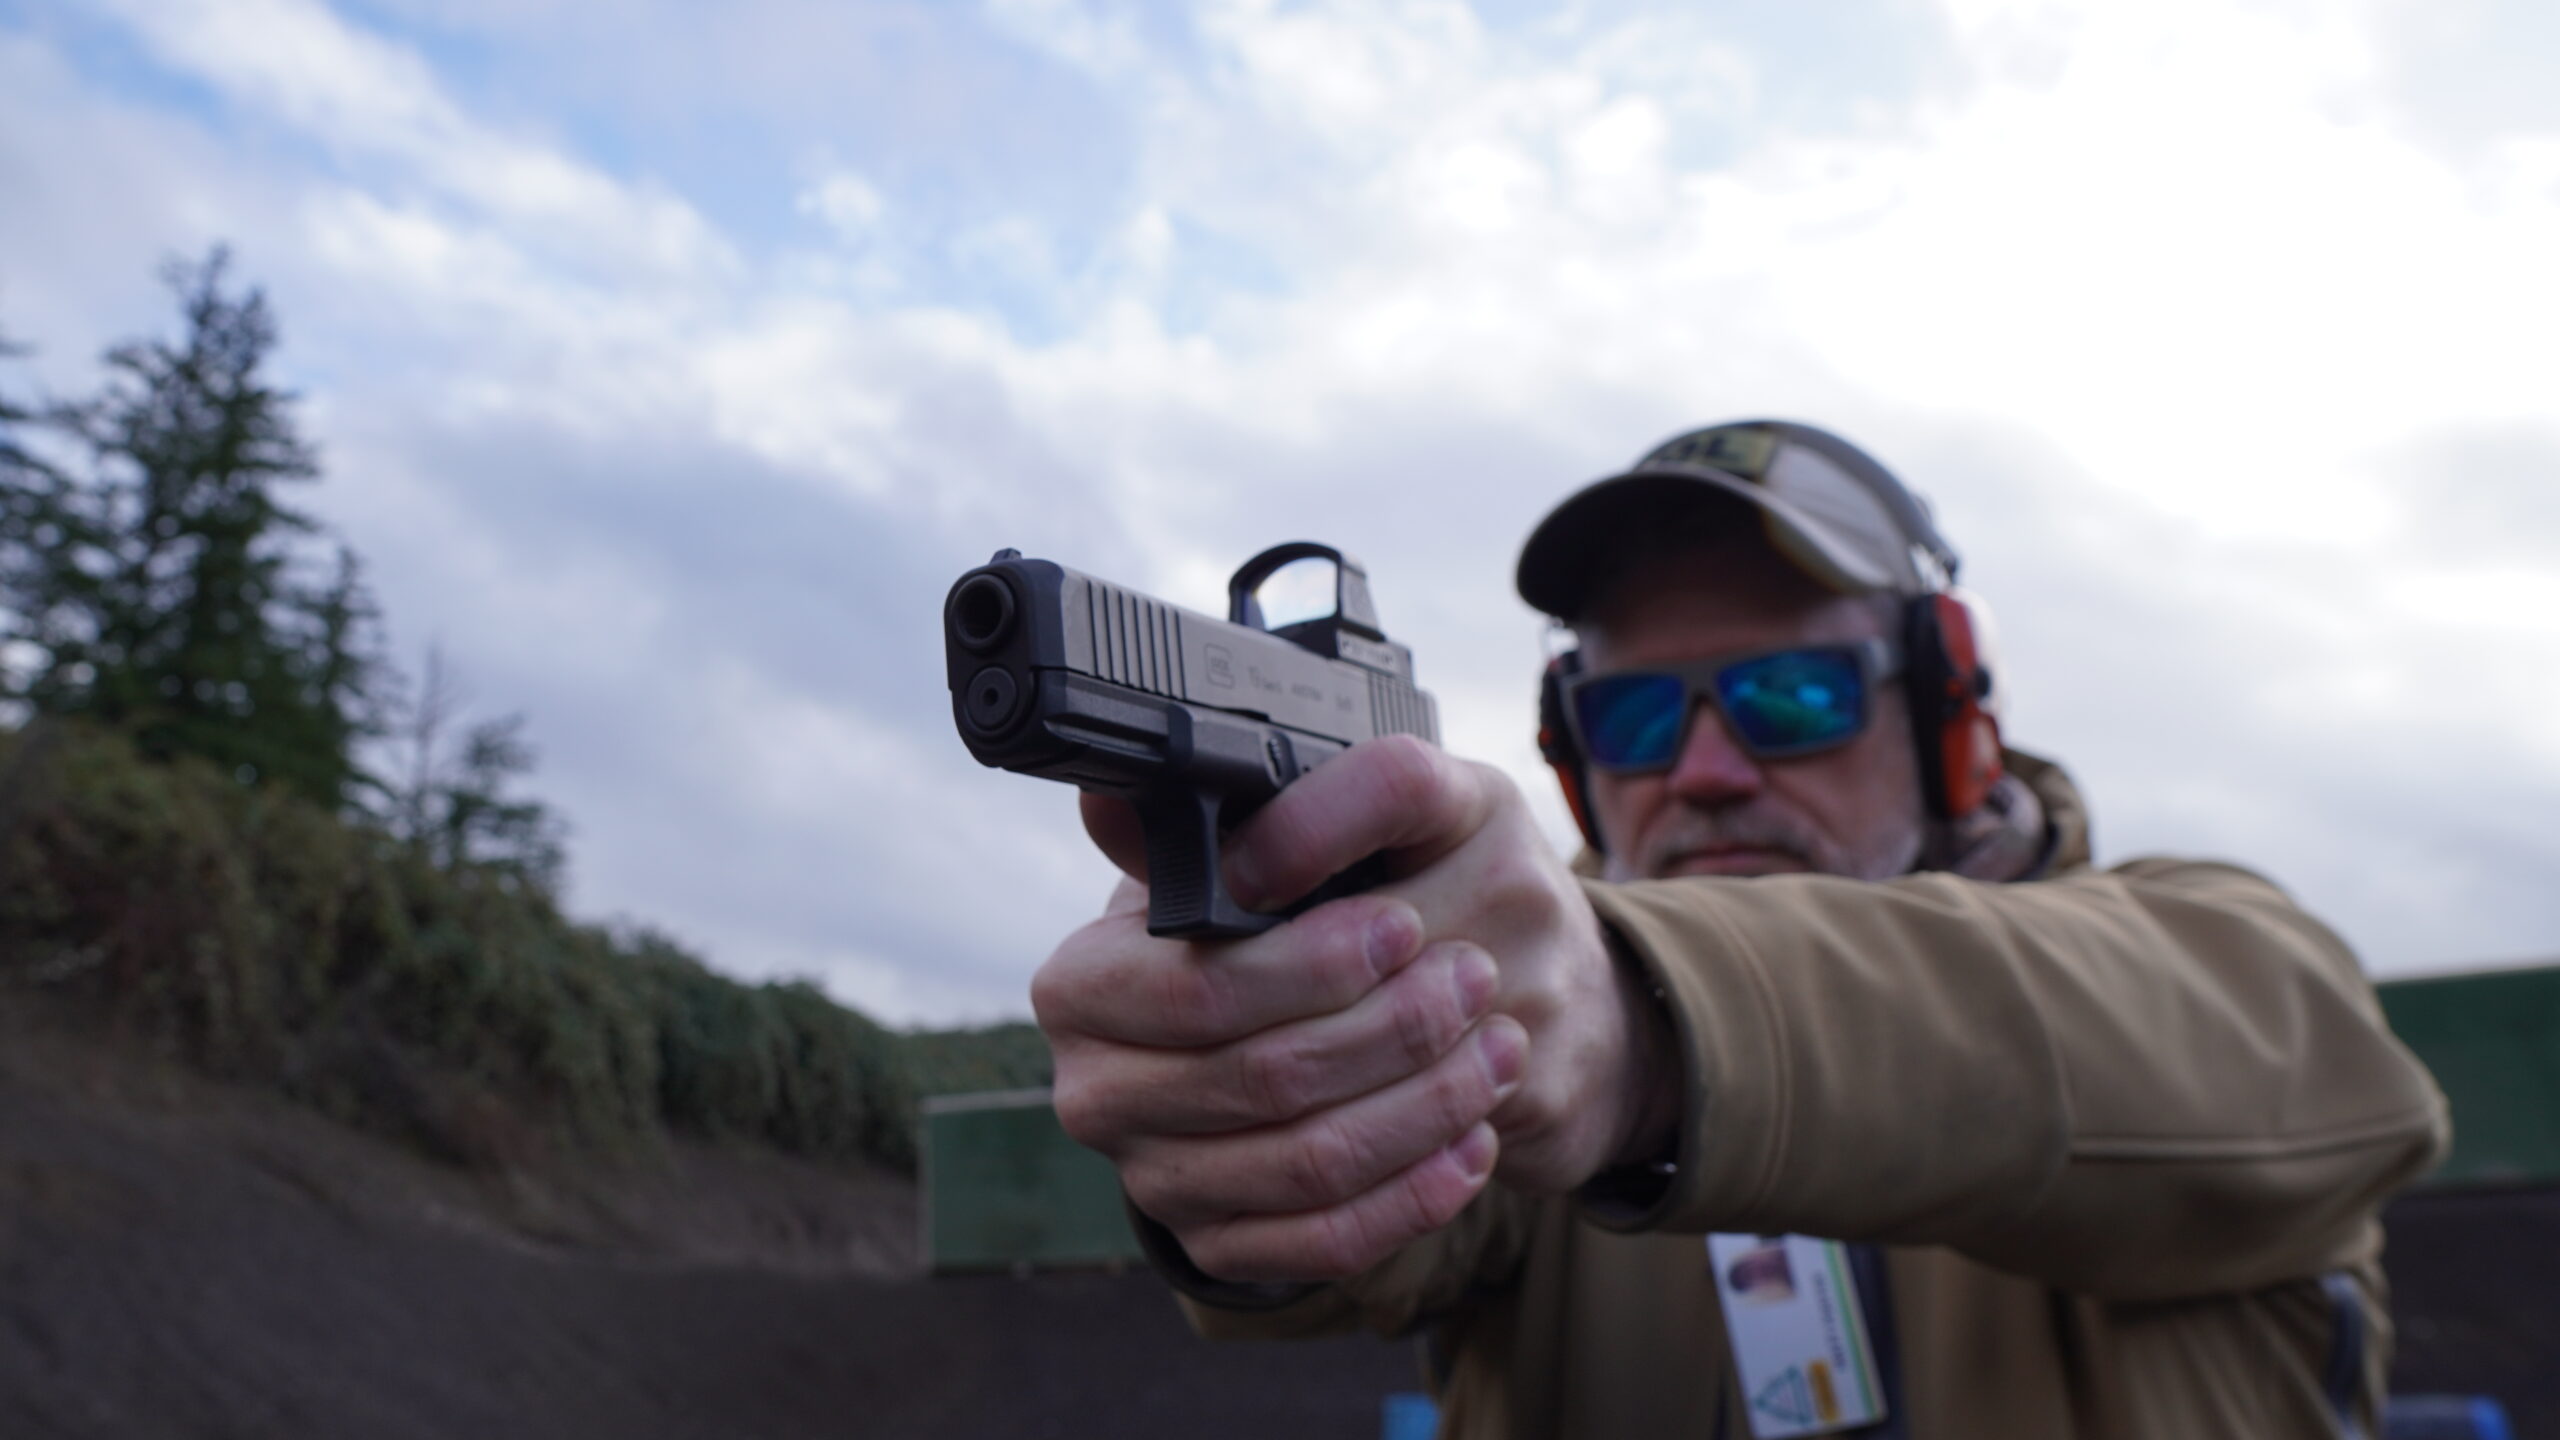 The author testing one of the best glocks.